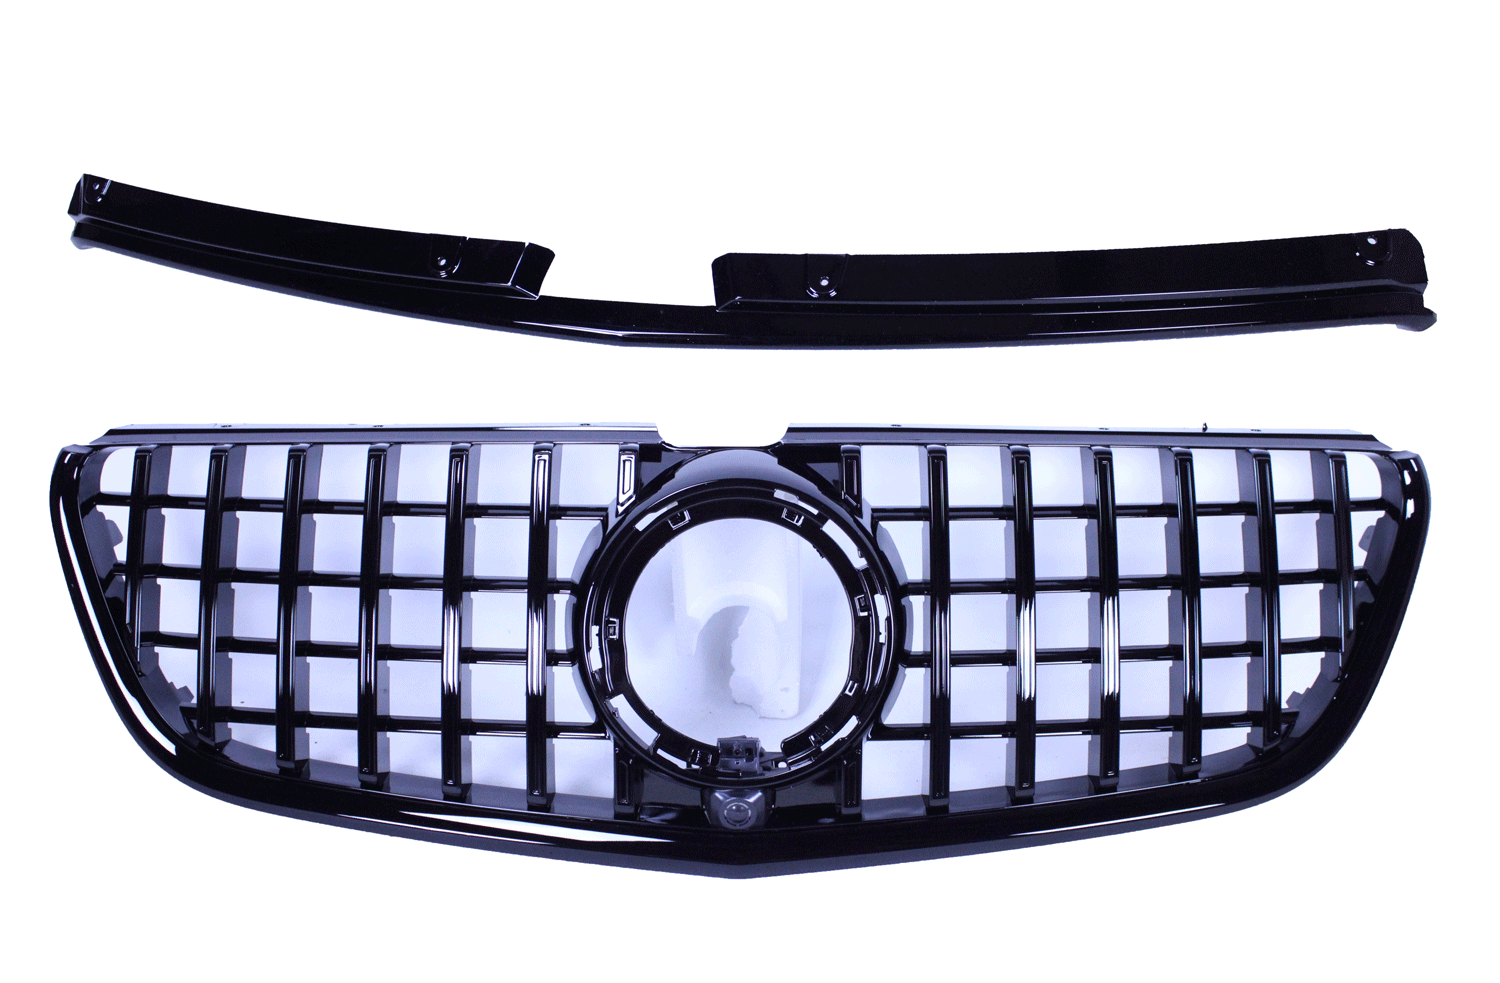 M-B Facelift Vito W447 GT-R Black front grill